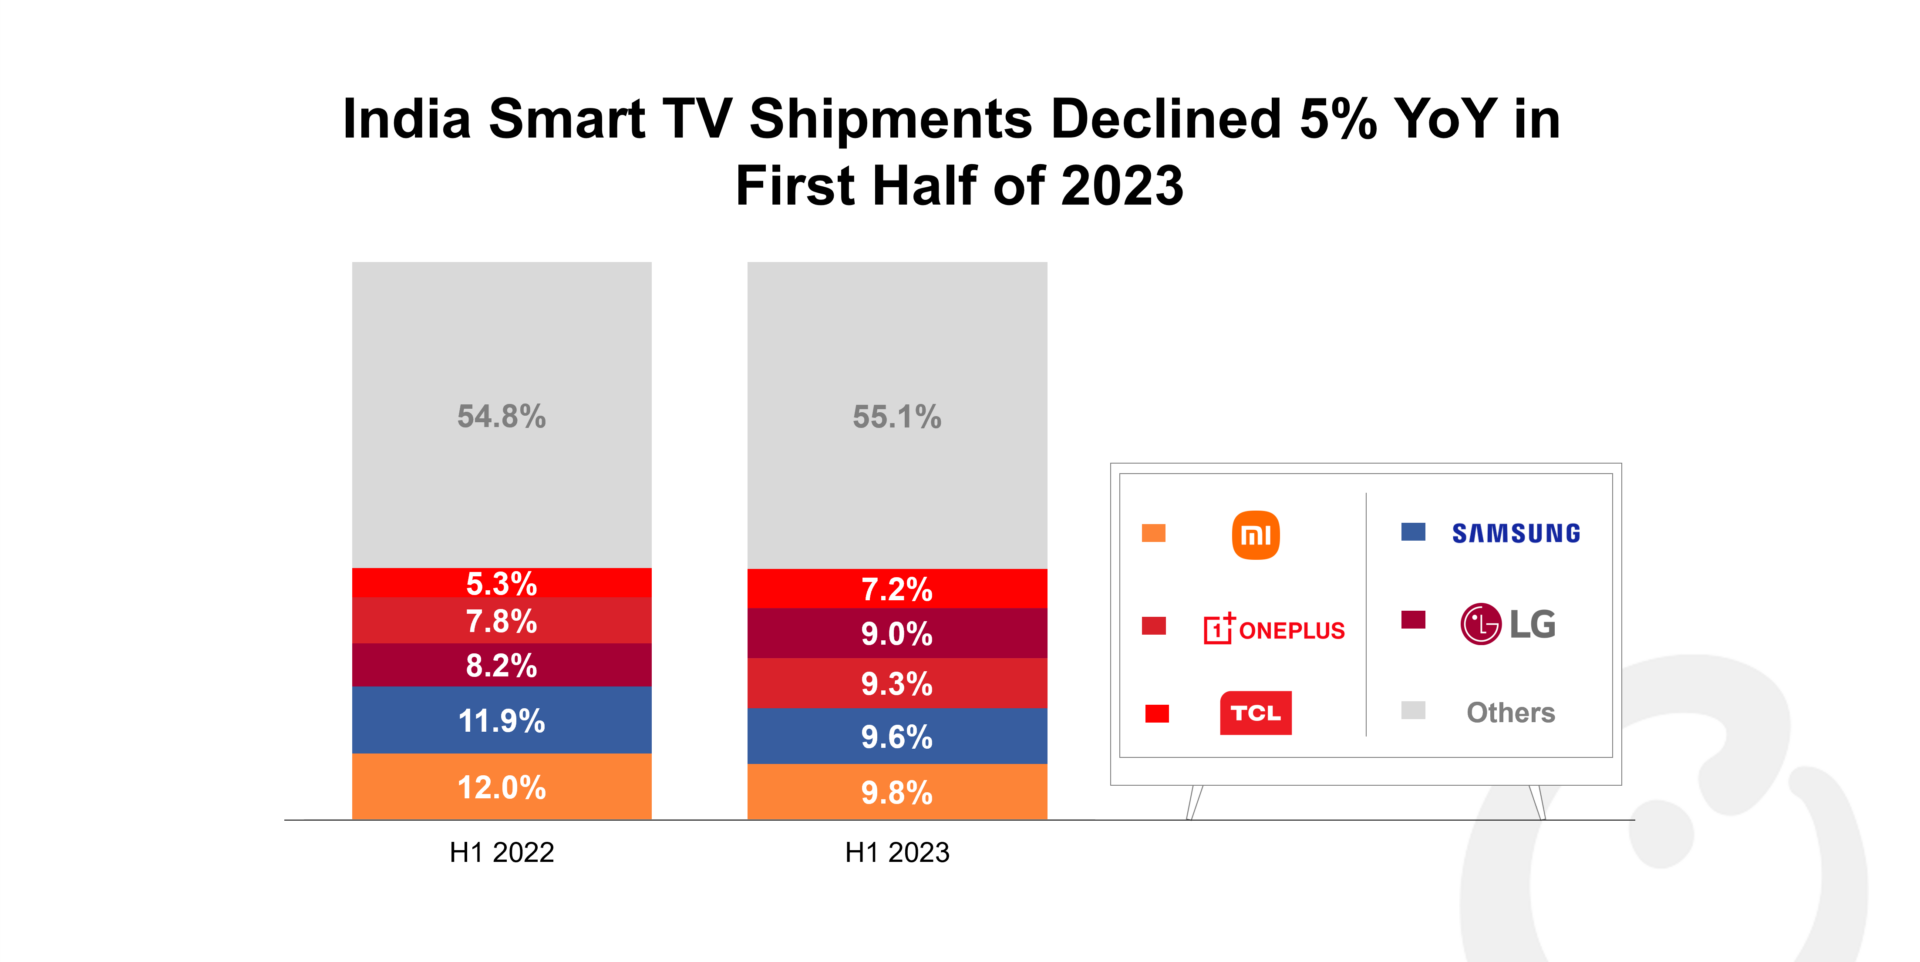 India Smart TV Shipments Declined 5% YoY in First Half of 2023